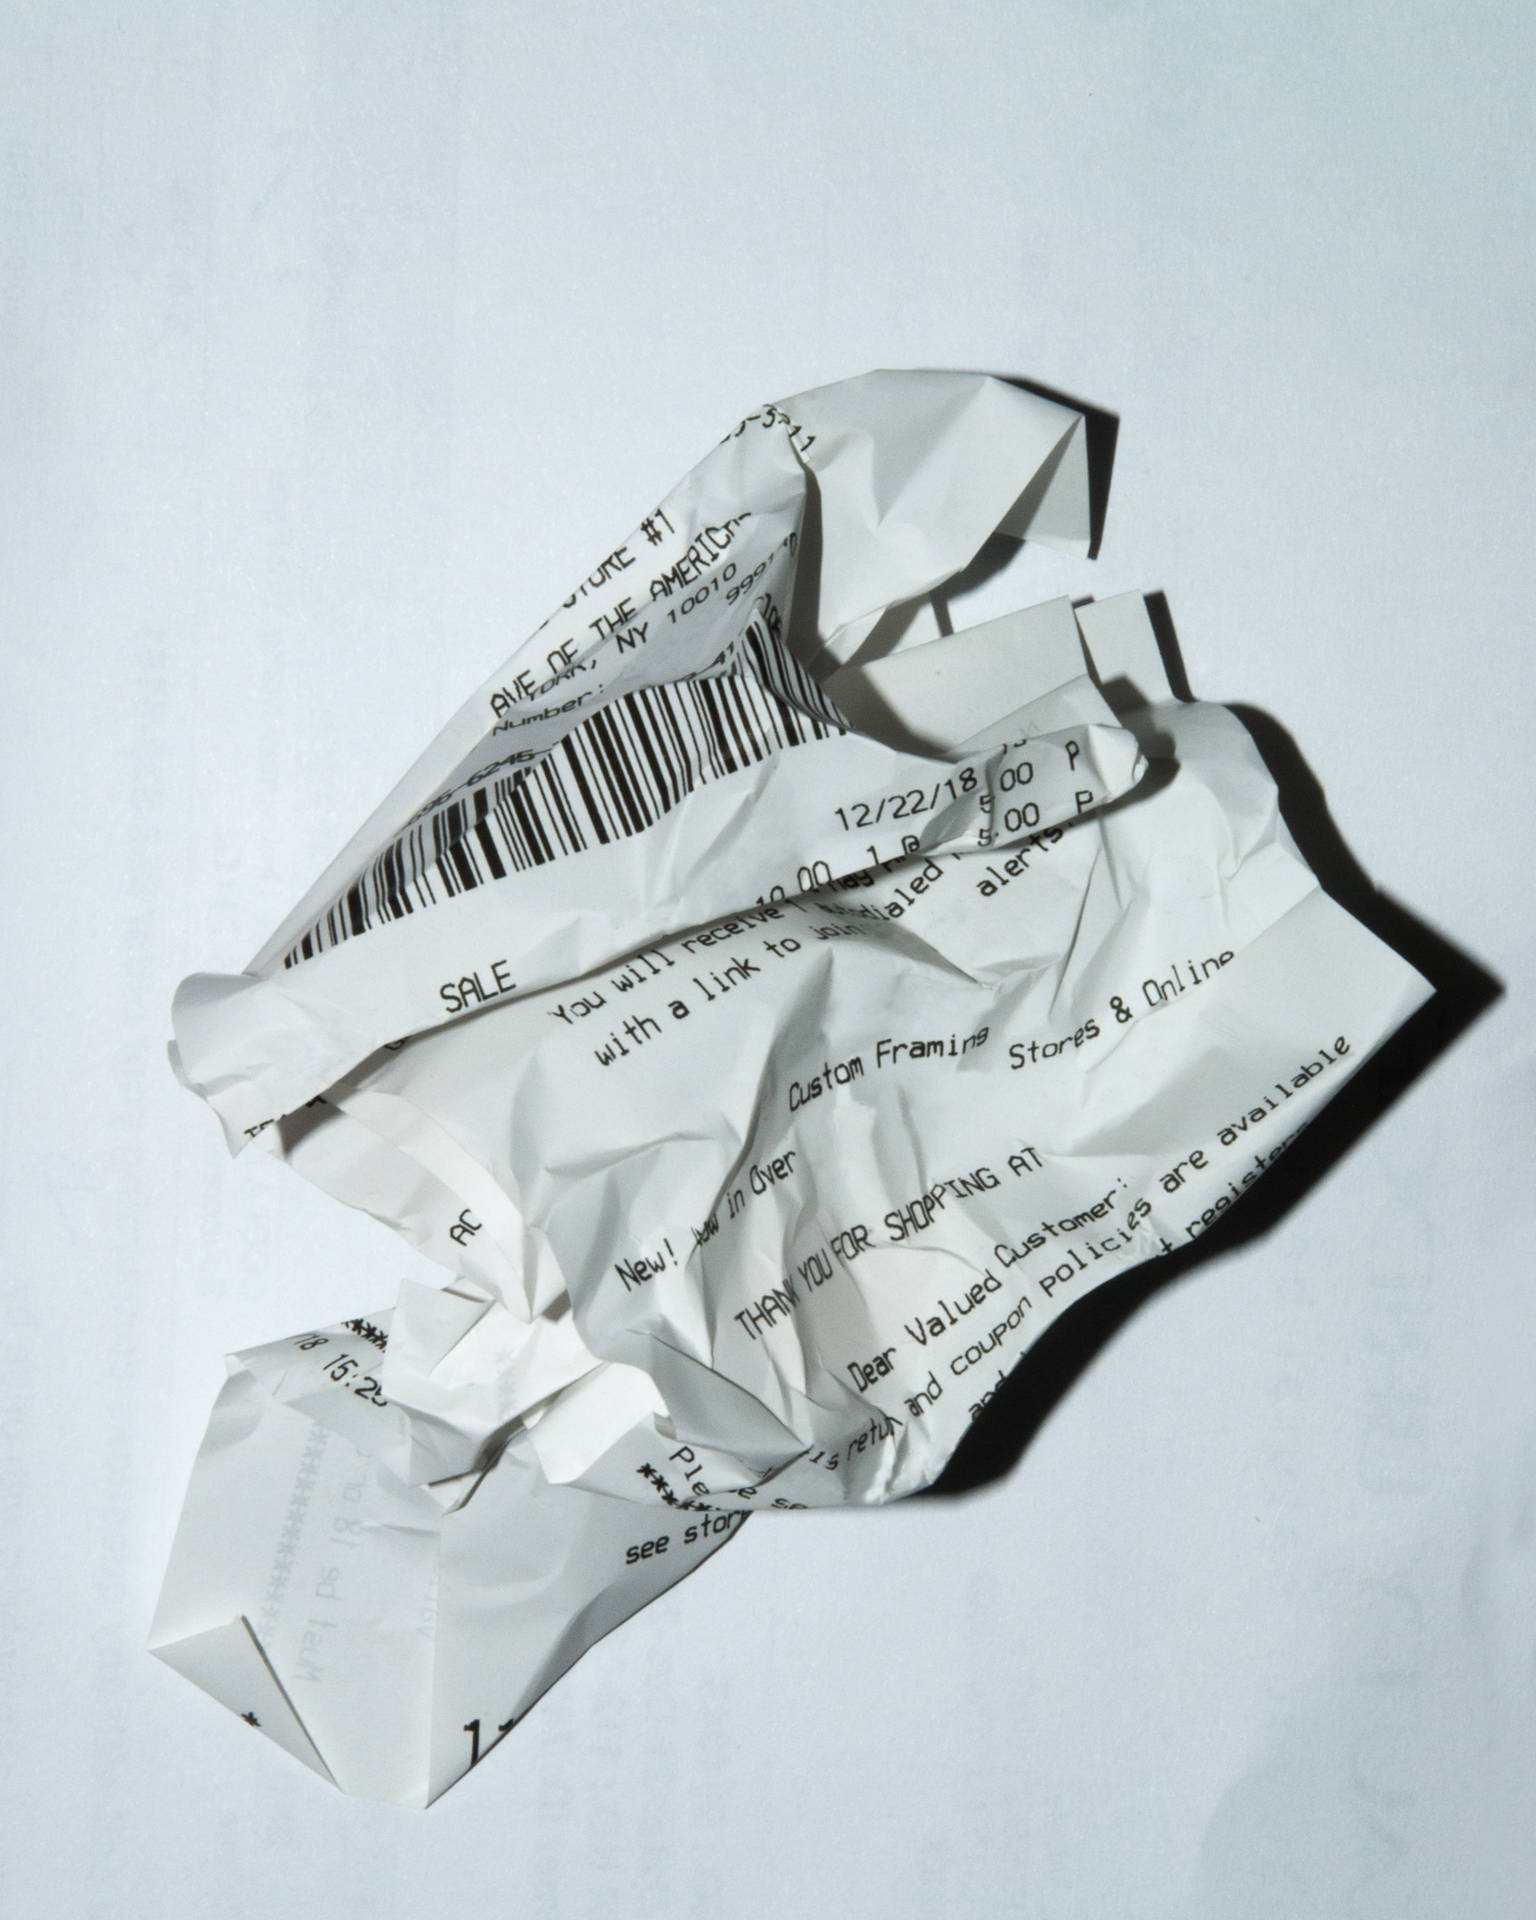 Crumpled Receipt Picture